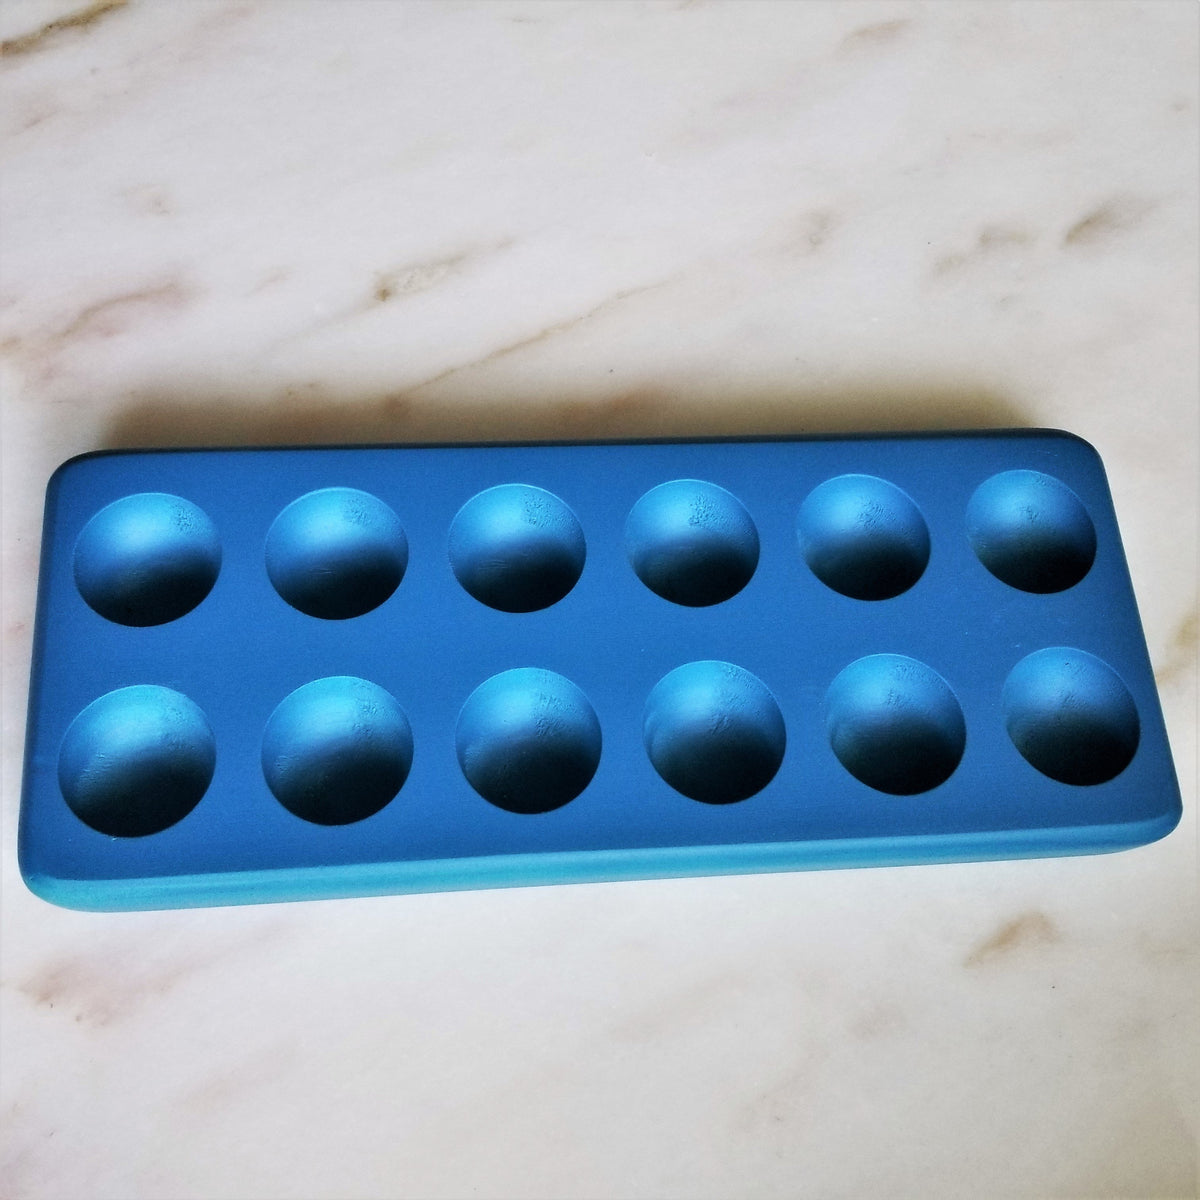 Henlay Decorative Blue Egg Storage Tray Wooden Egg Holder for Refrigerator,  Kitchen Counter, Serving, or Display. 